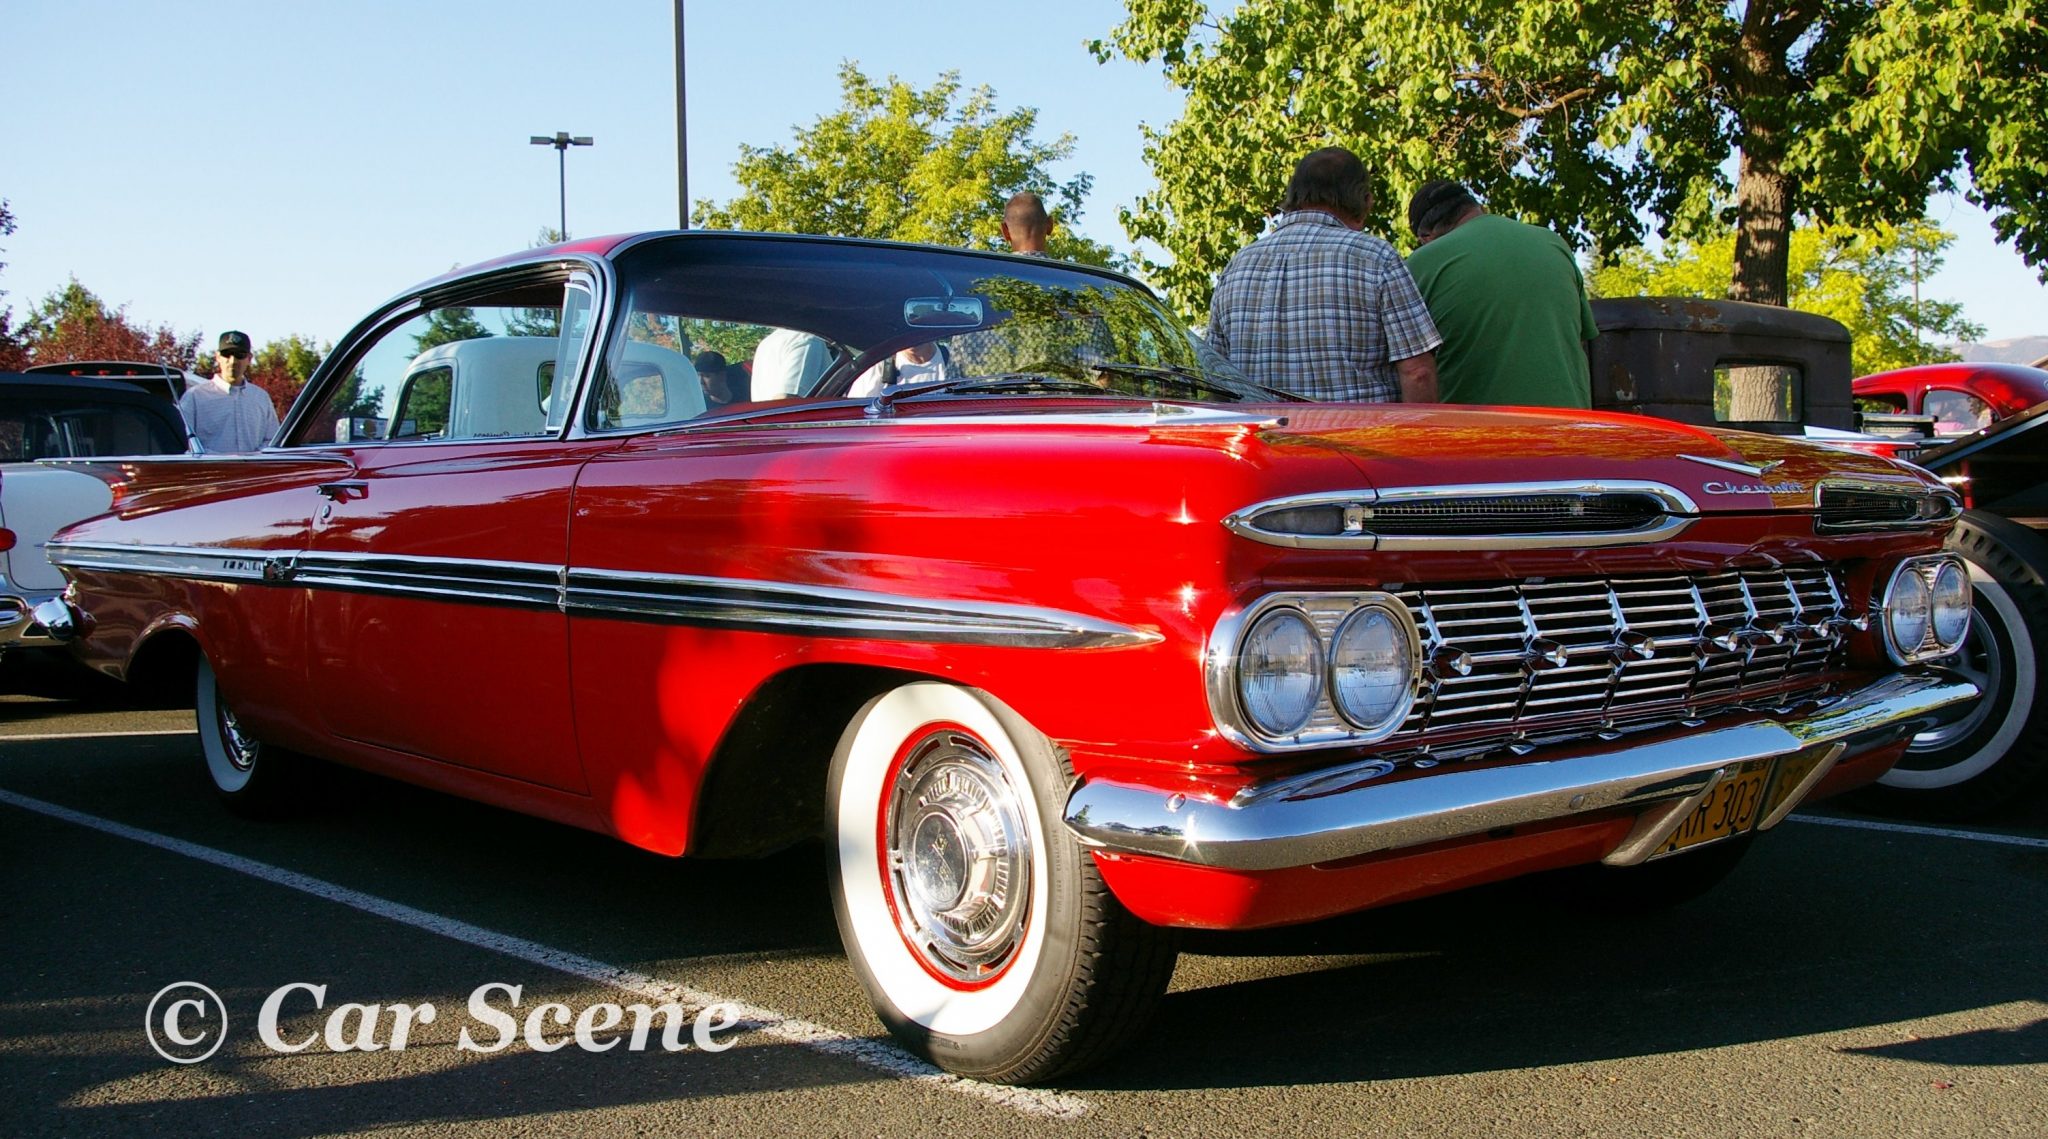 1959 Chevrolet Impala Coupe front three quarters view